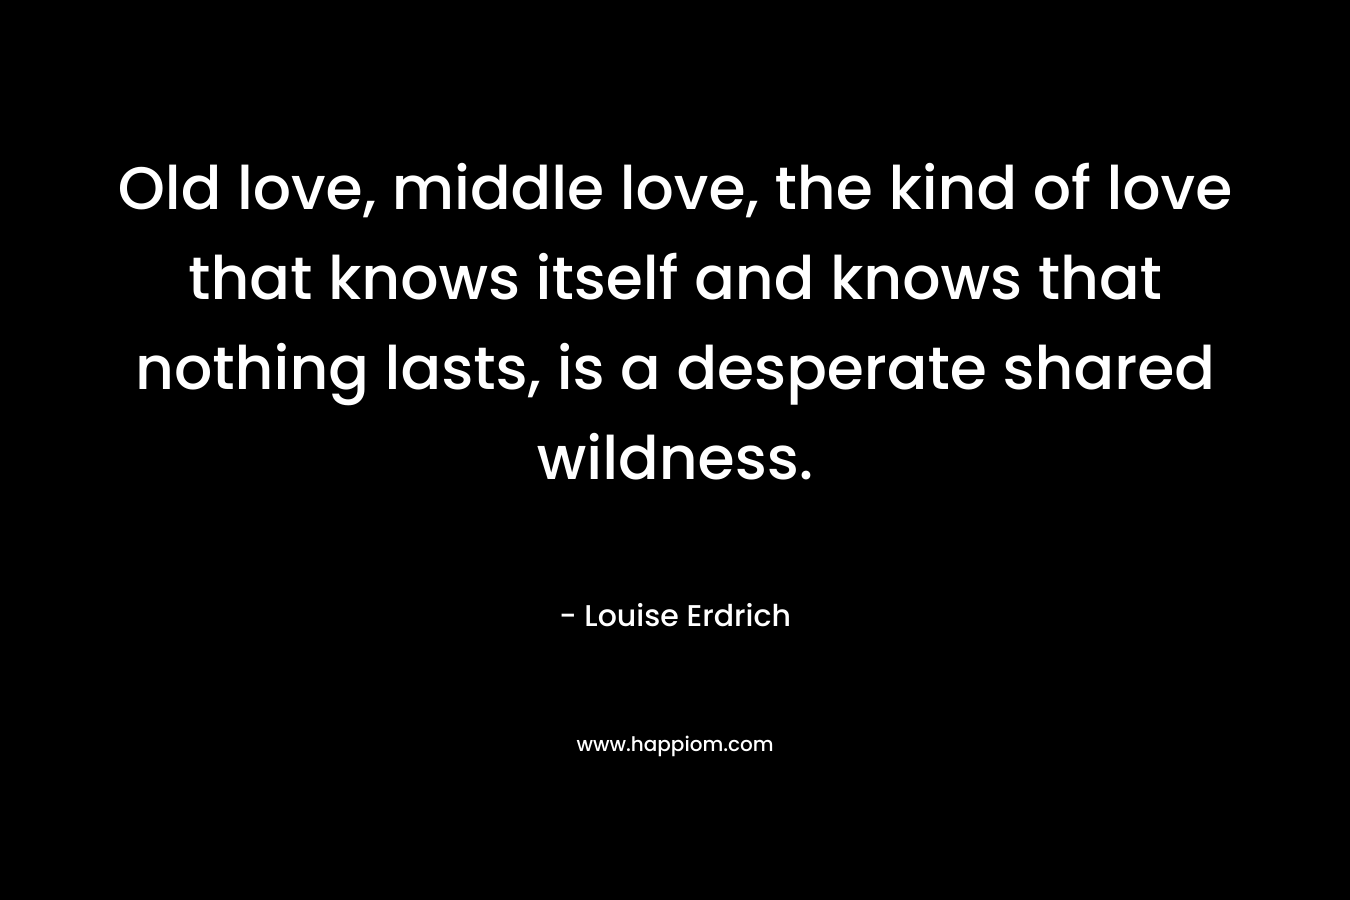 Old love, middle love, the kind of love that knows itself and knows that nothing lasts, is a desperate shared wildness. – Louise Erdrich